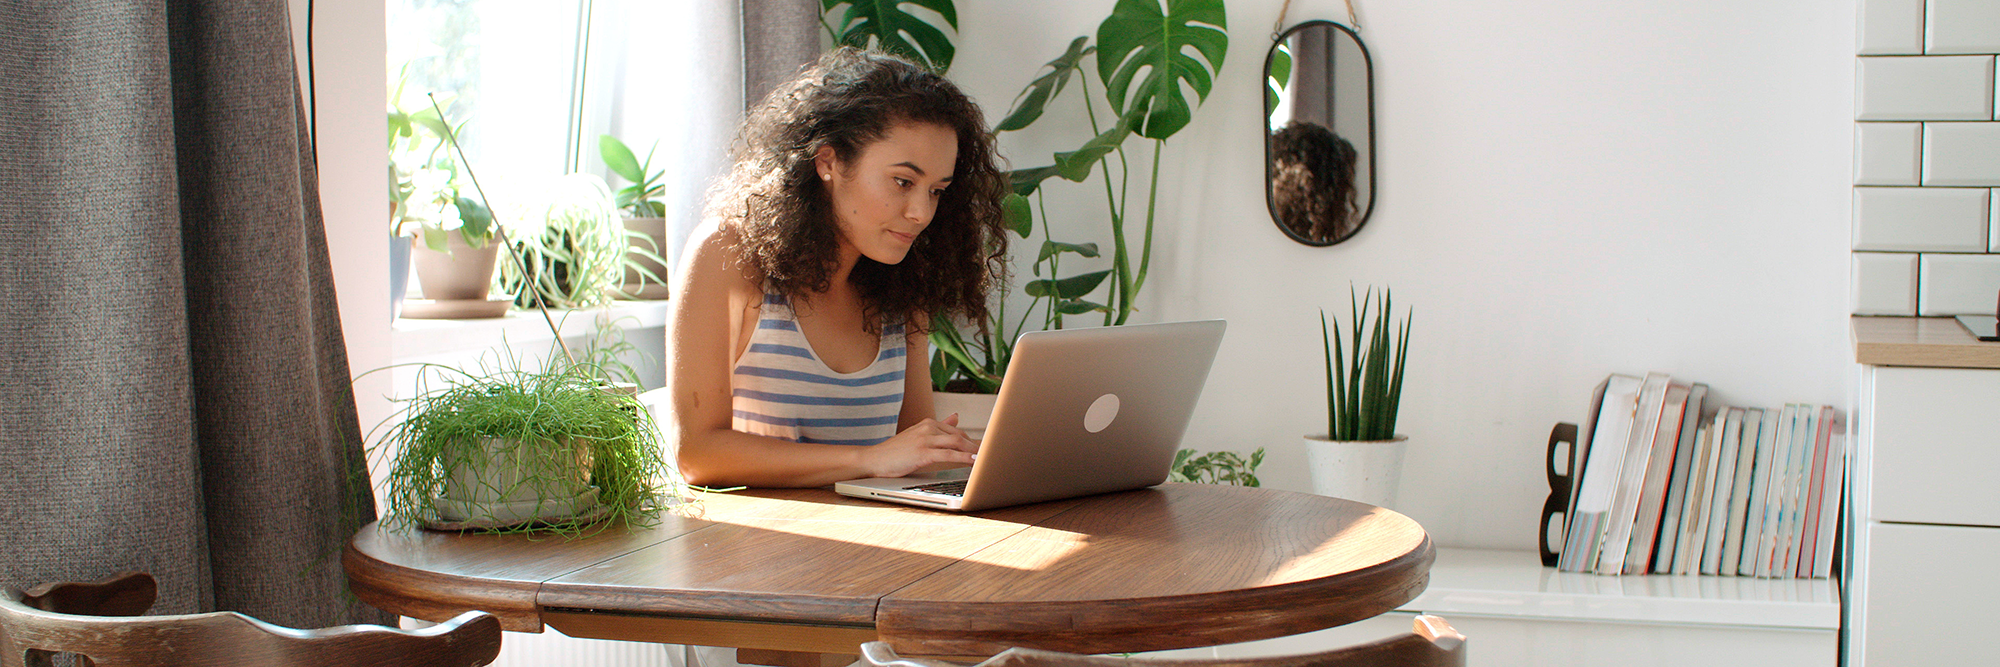 young woman in a room with lots of houseplants looking at her laptop  | Ultimate guide to Essential digital skills | Digital Wings blog